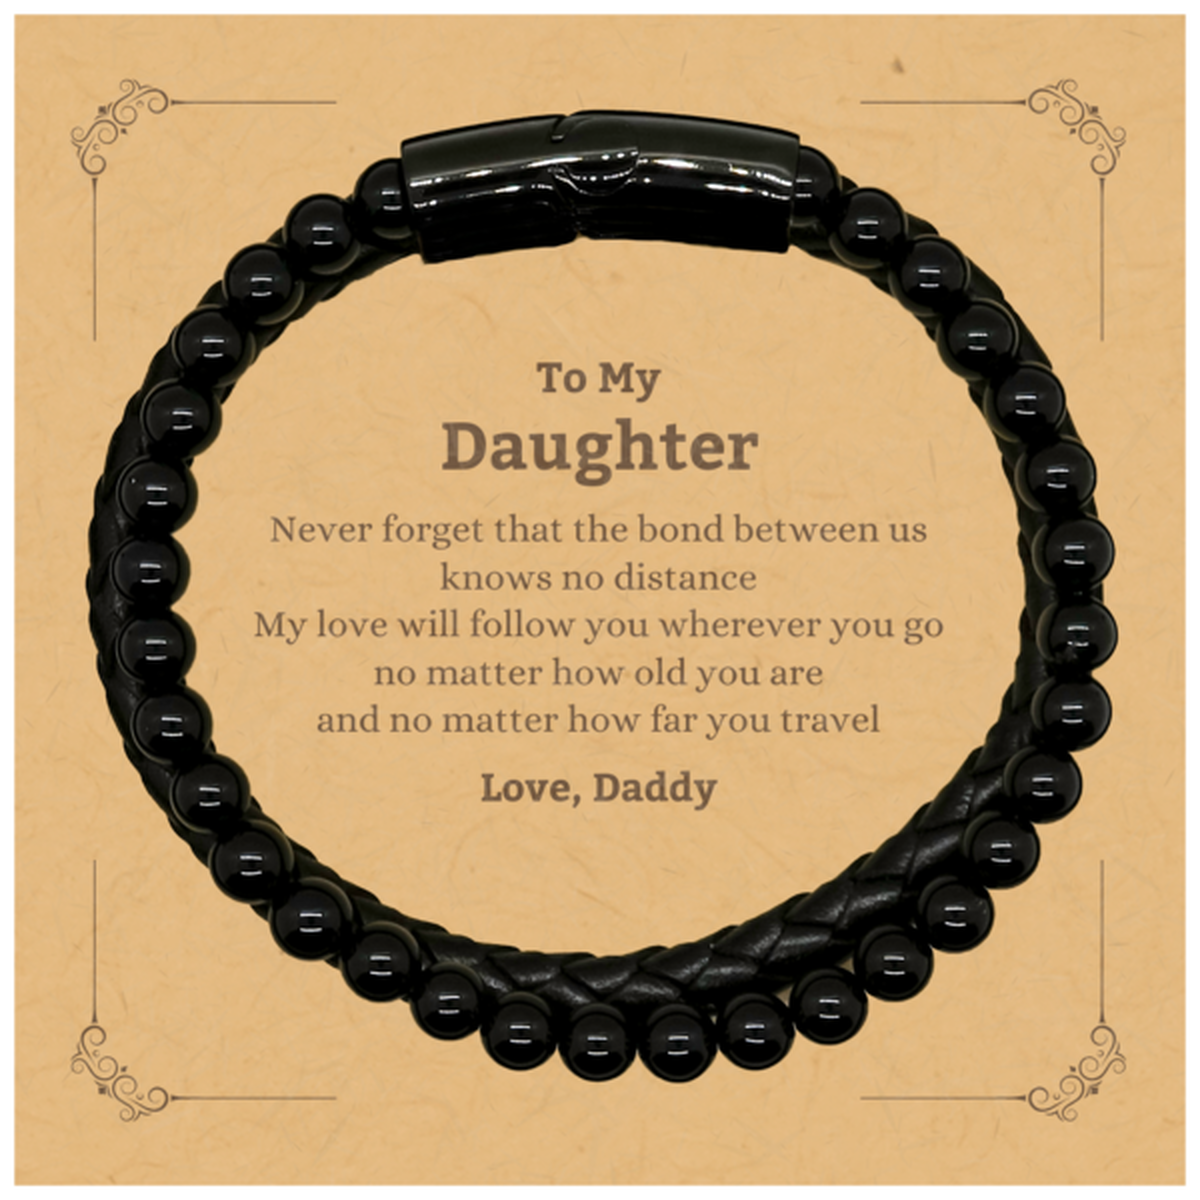 Daughter Birthday Gifts from Daddy, Adjustable Stone Leather Bracelets for Daughter Christmas Graduation Unique Gifts Daughter Never forget that the bond between us knows no distance. Love, Daddy